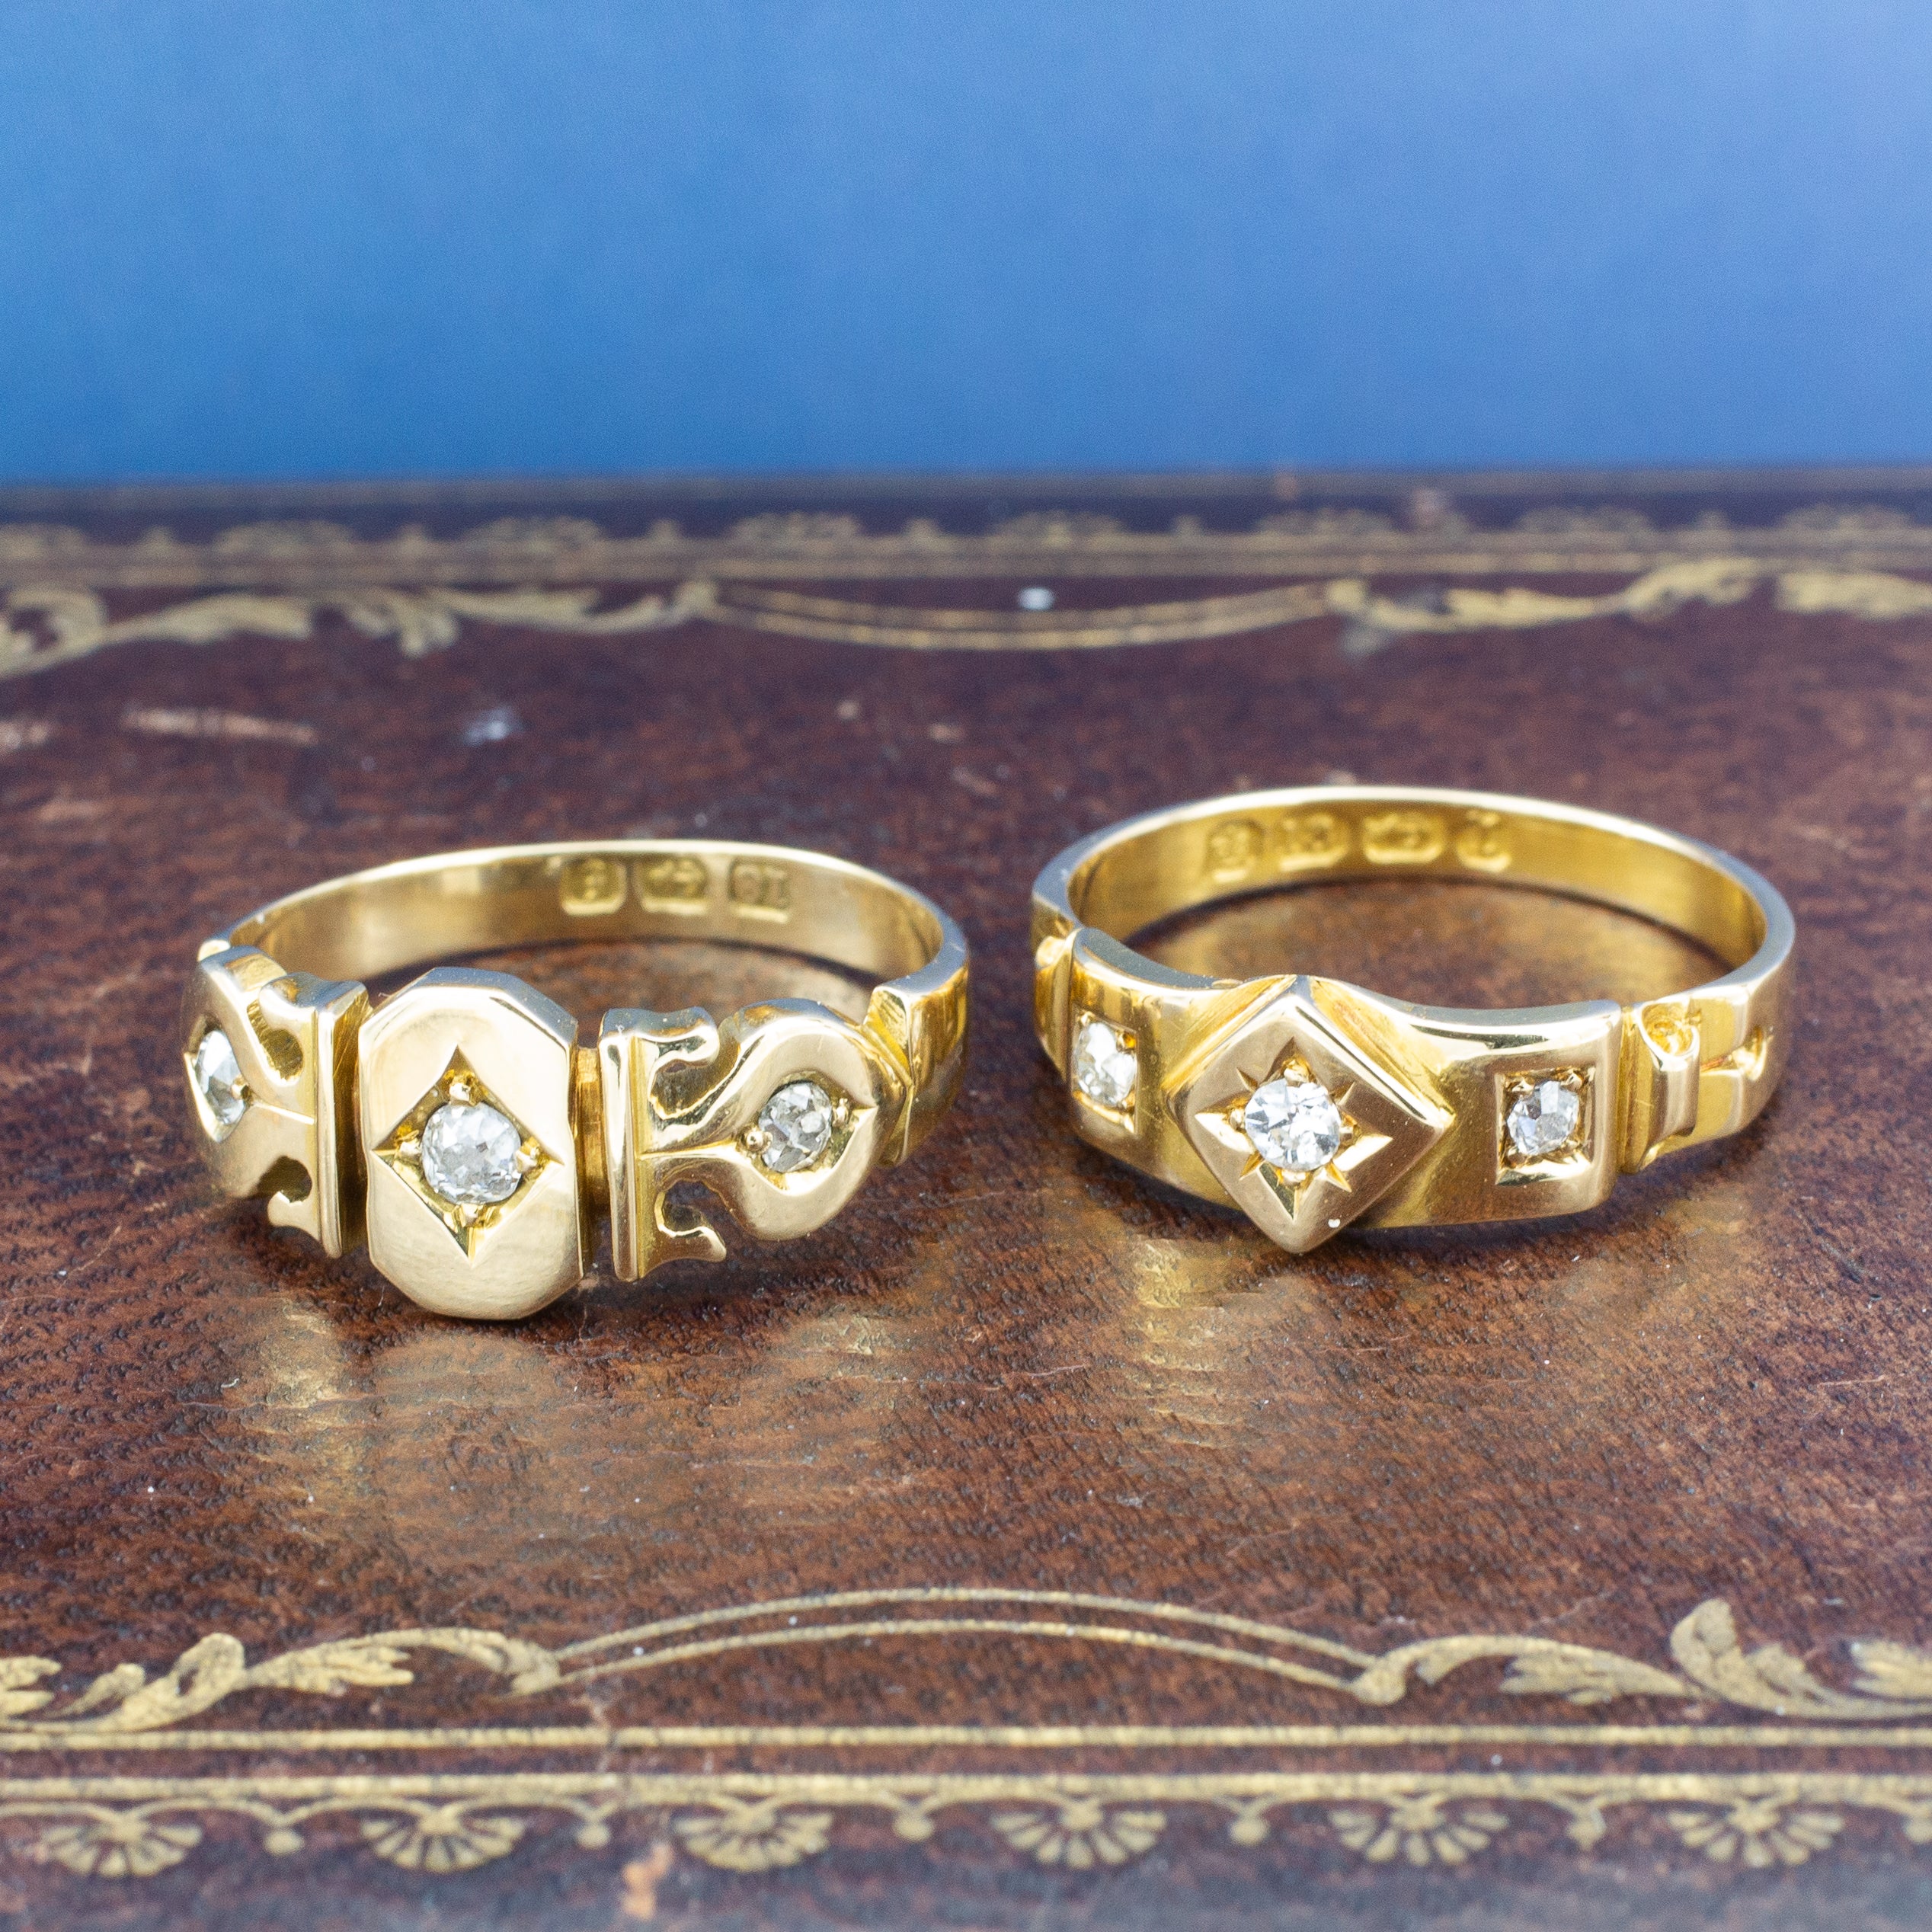 Antique Rings Gold - Shop The Shop for Vintage & Engagement Rings